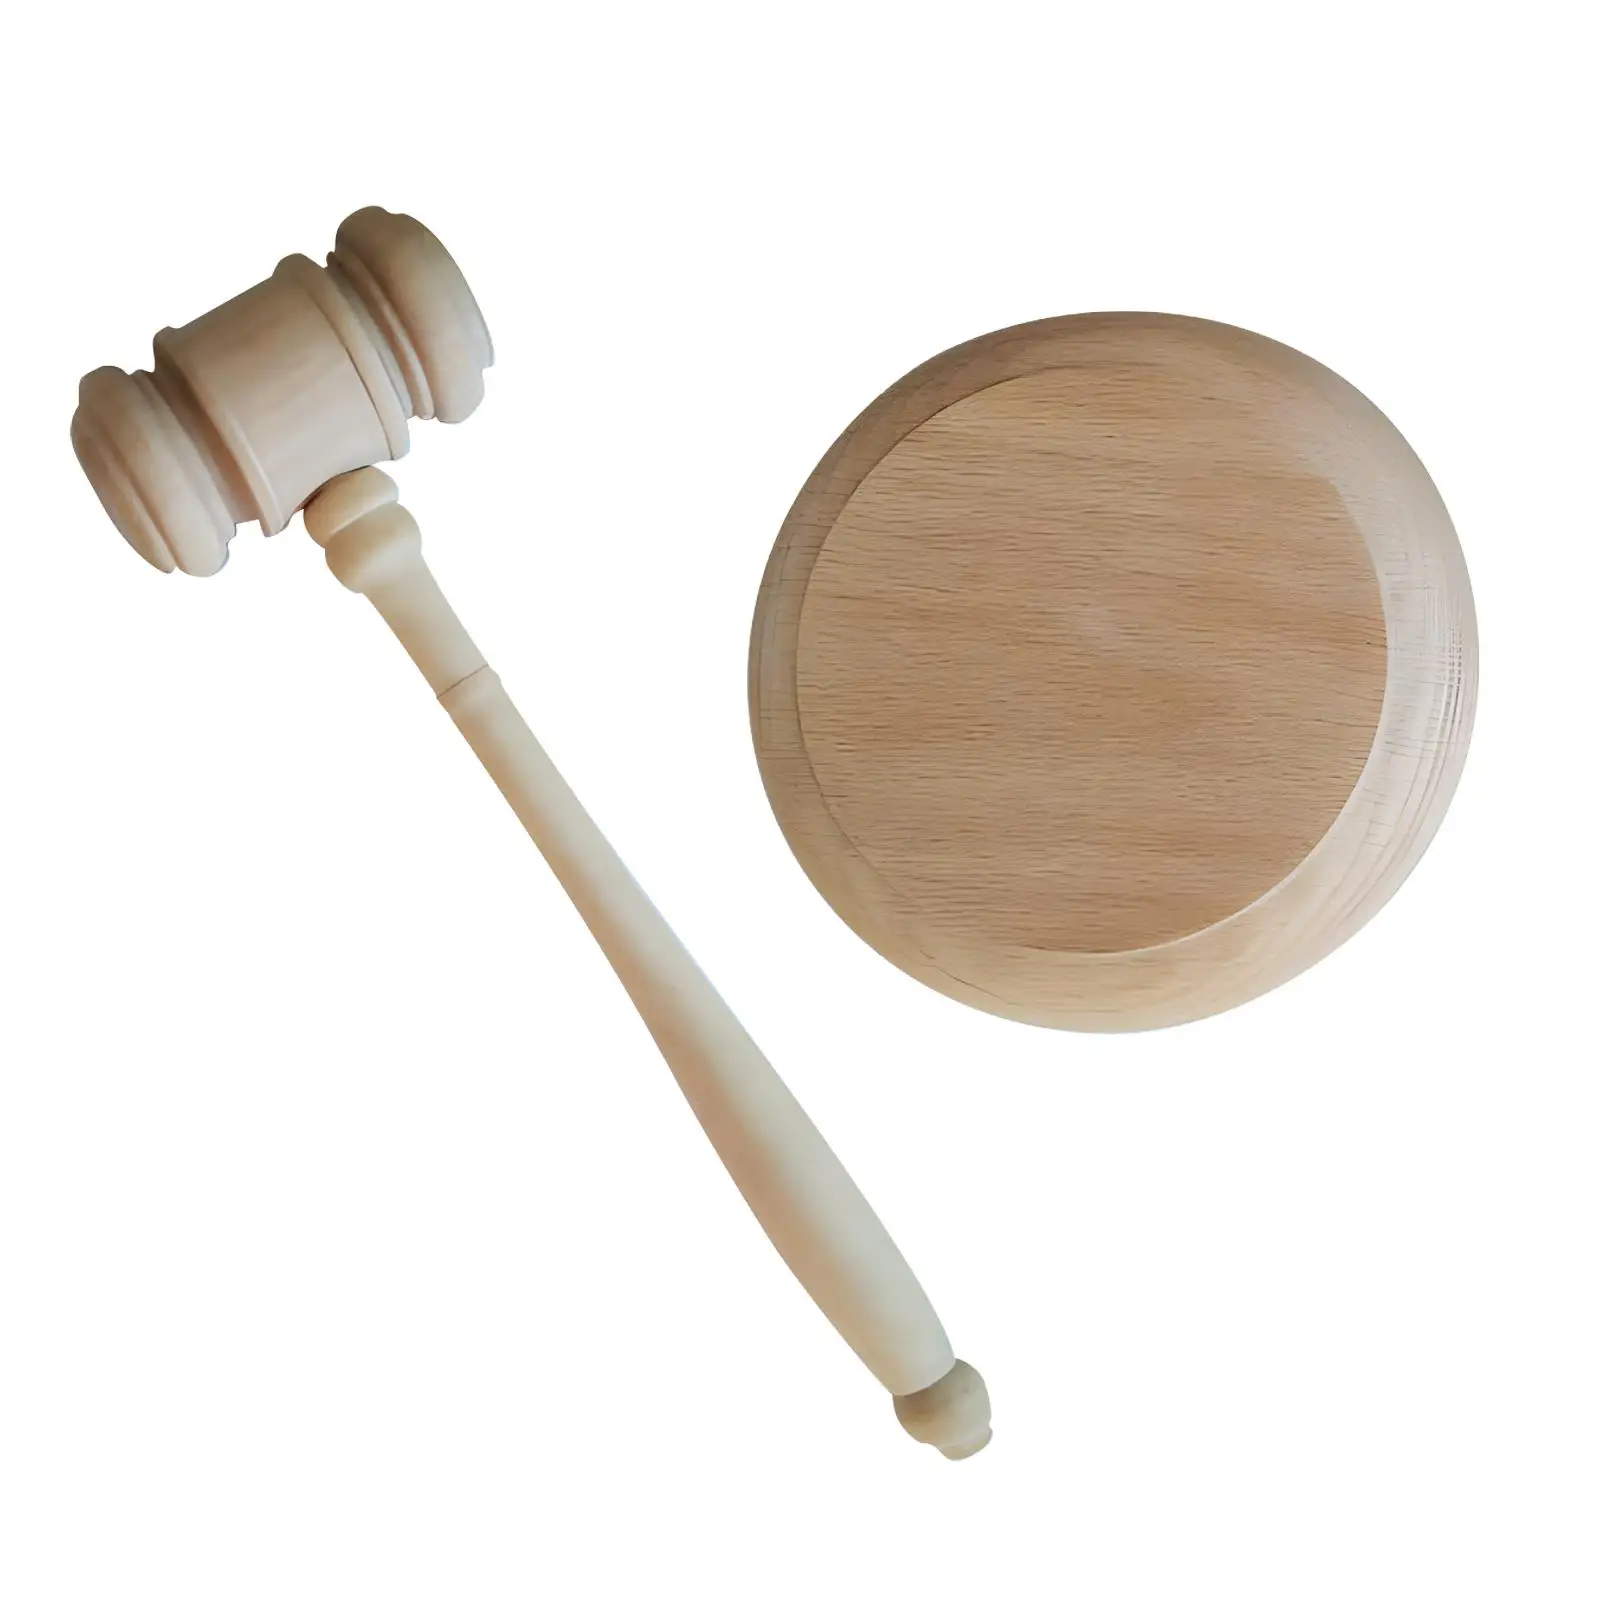 Wooden Gavel and Sound Block Props Handmade Exquisite Unique Gifts Auction Hammer Toy for Meeting Auction Lawyer Courtroom Judge